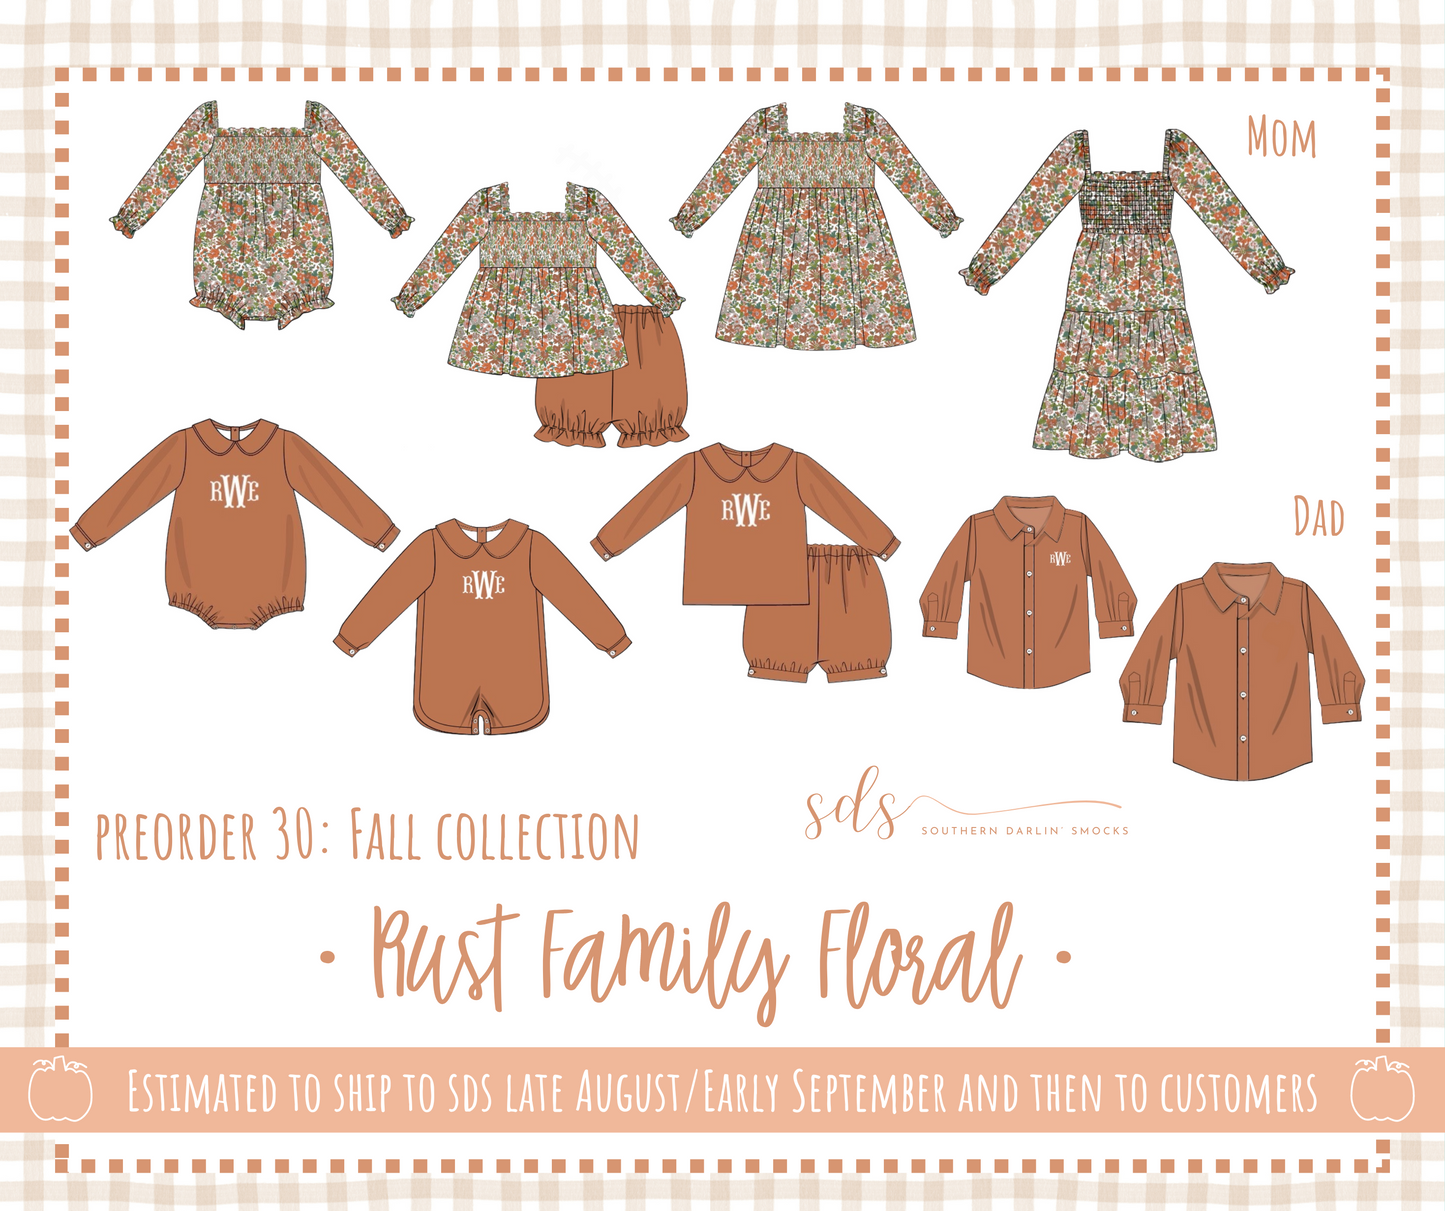 PREORDER 30: FALL COLLECTION - Rust Family Floral Mom Dress